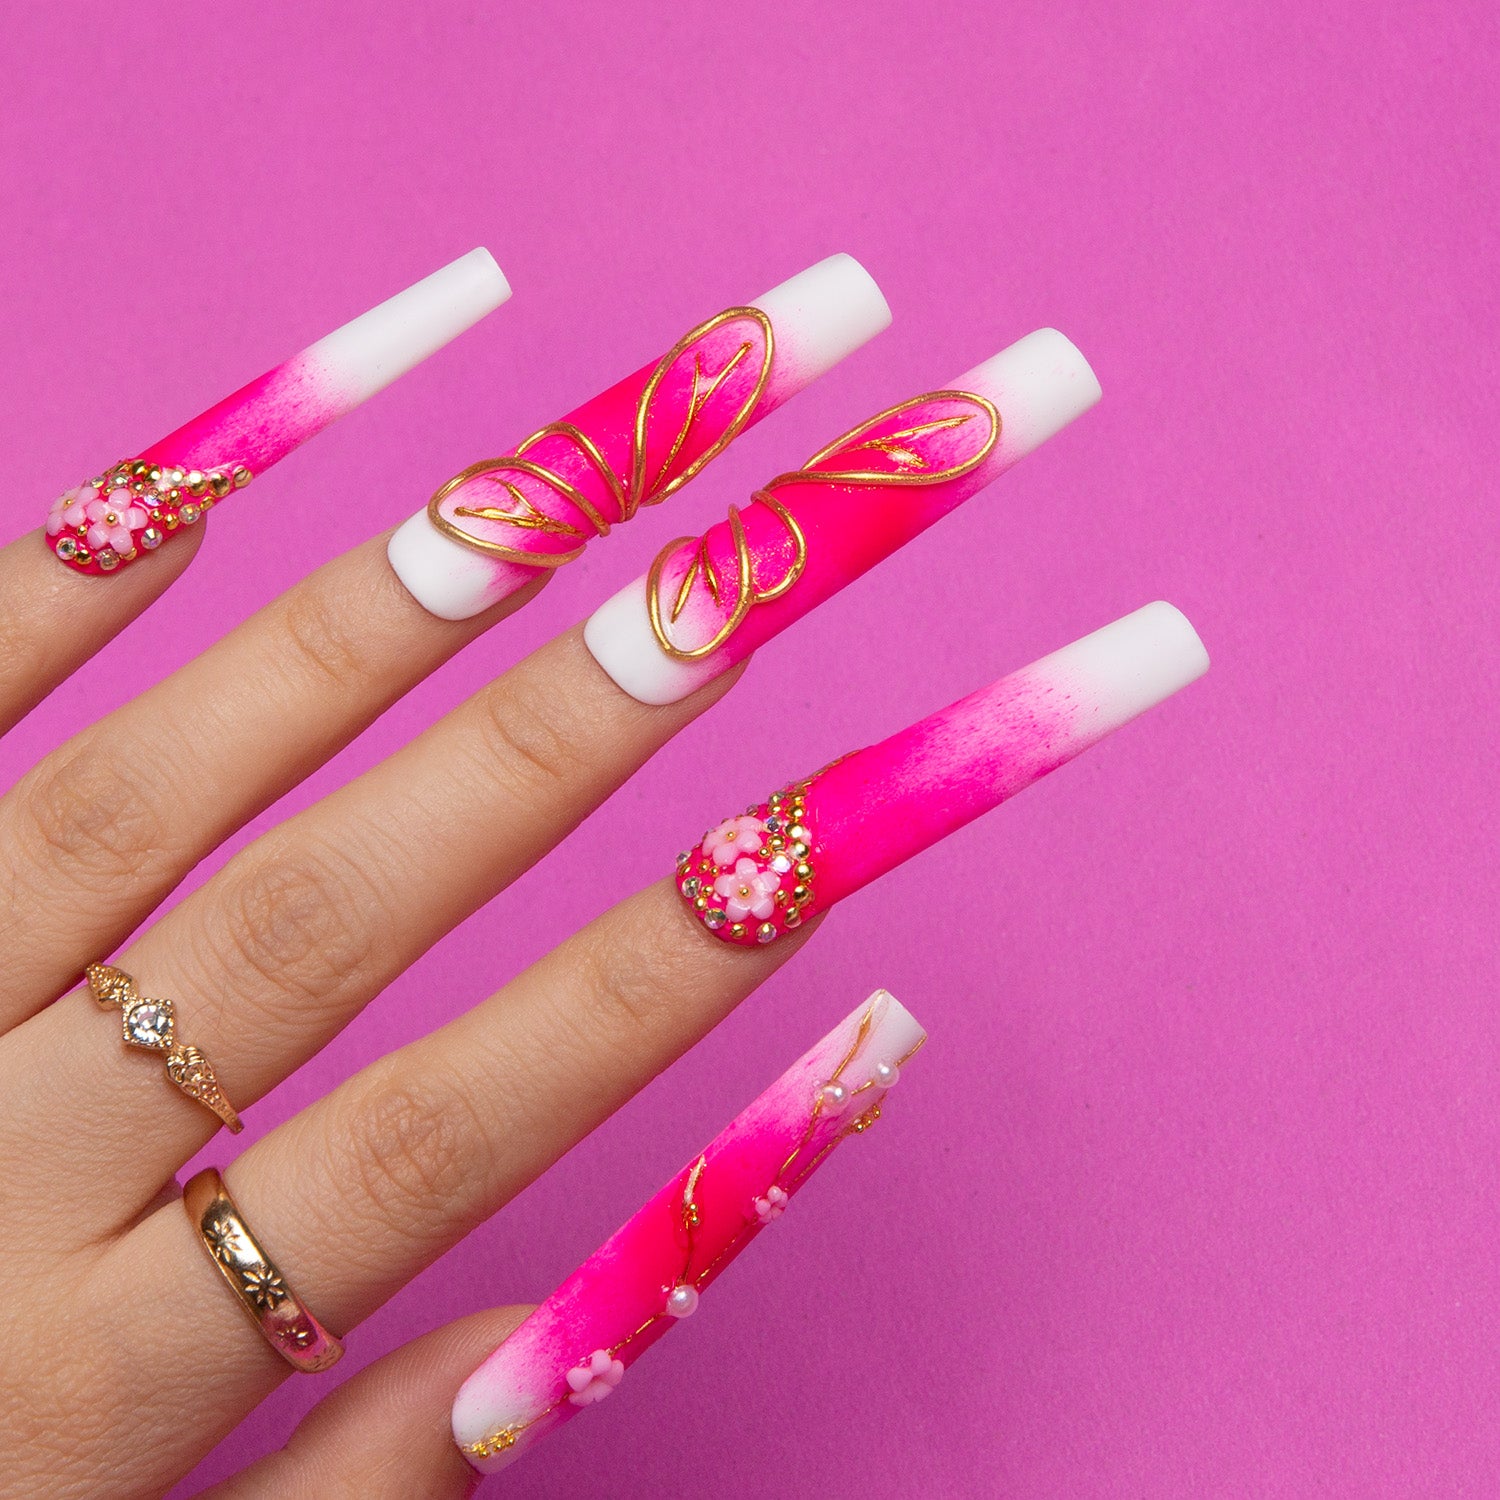 White base and bright pink press-on nails with hand-drawn golden butterflies and floral details against a pink background